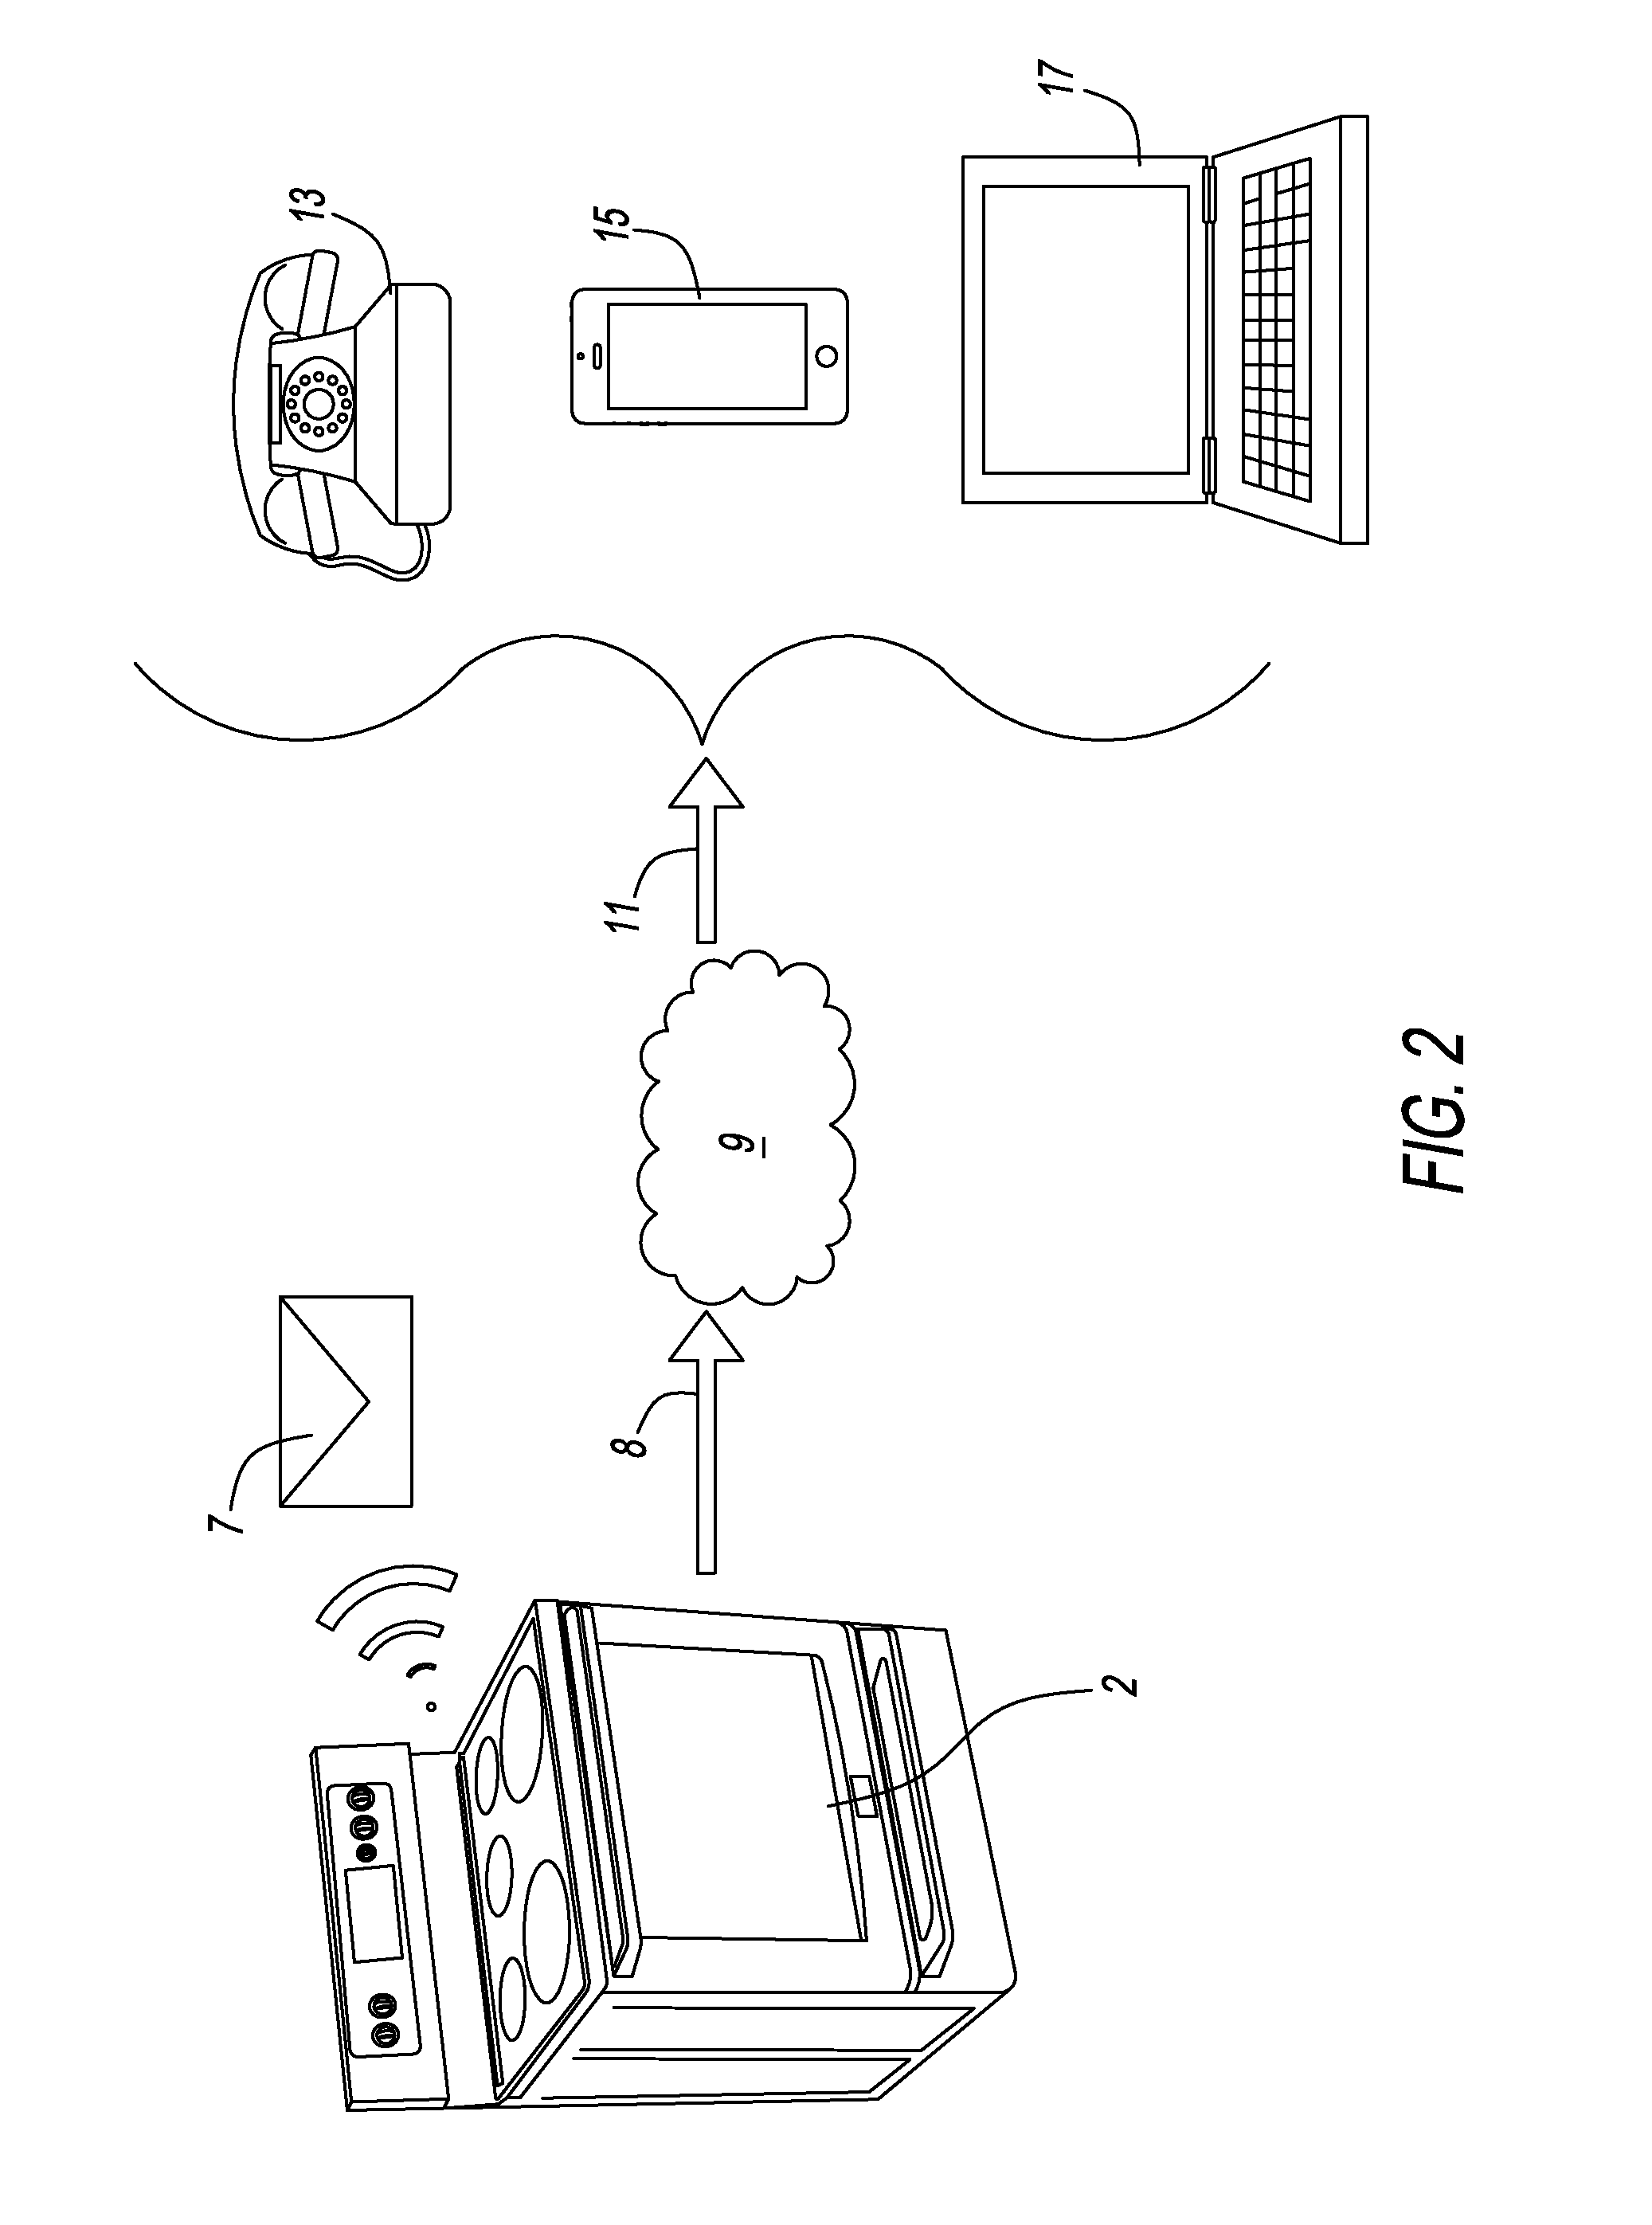 Appliance monitoring system and method with connectivity and communication protocols